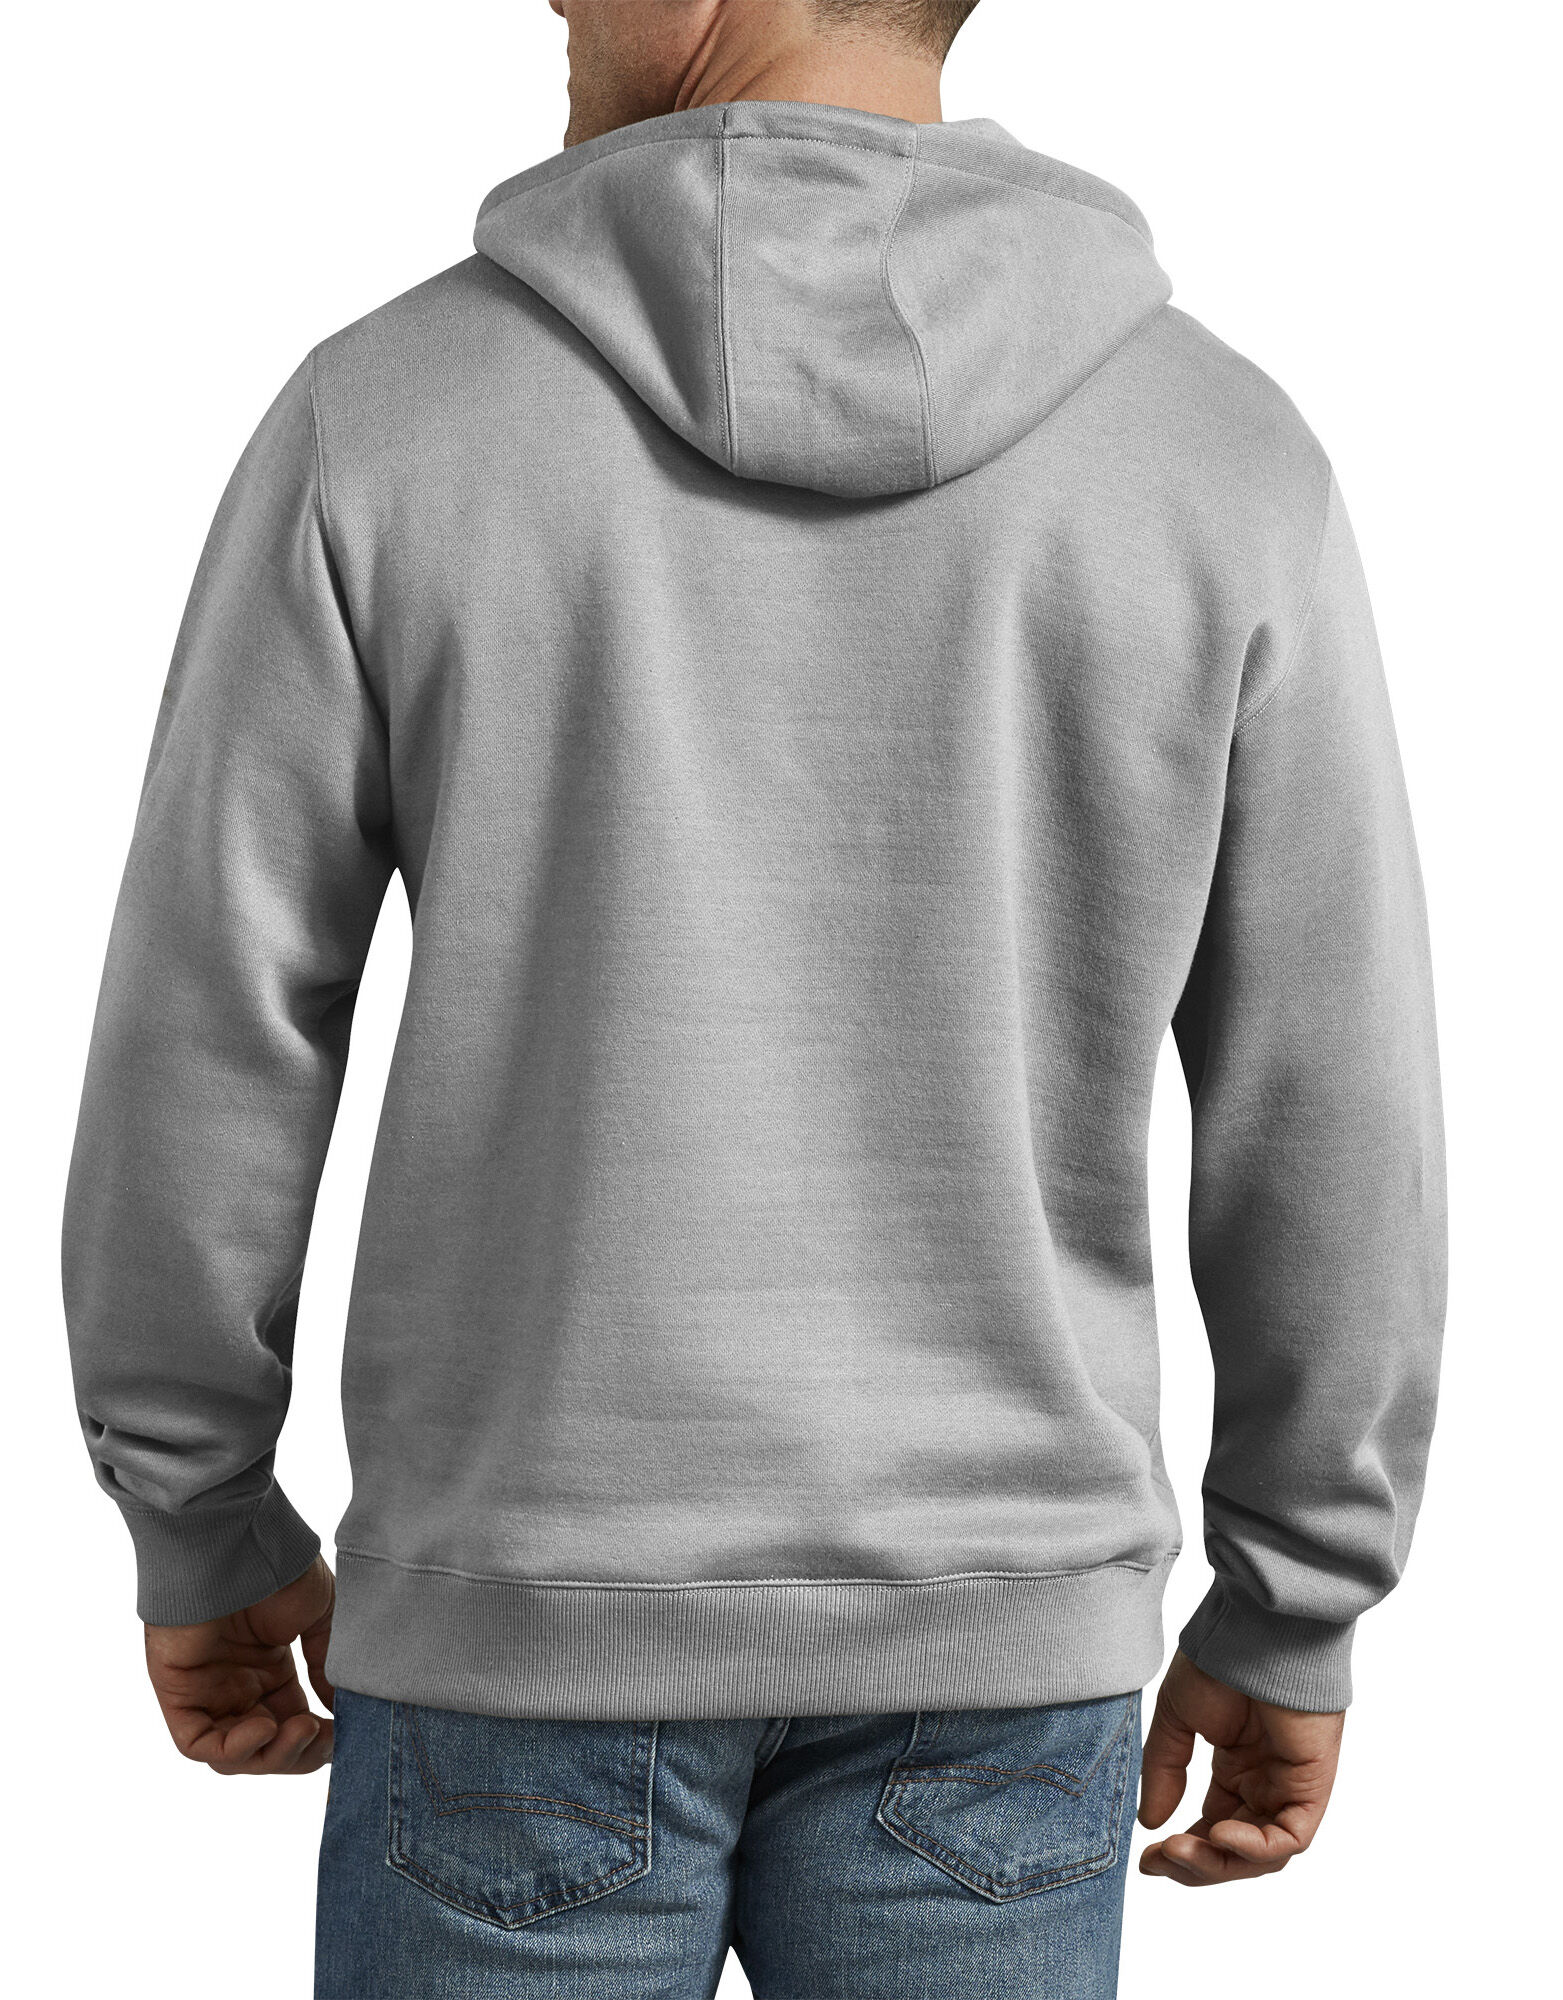 Relaxed Fit Graphic Fleece Pullover Hoodie - Dickies US, Heather Gray